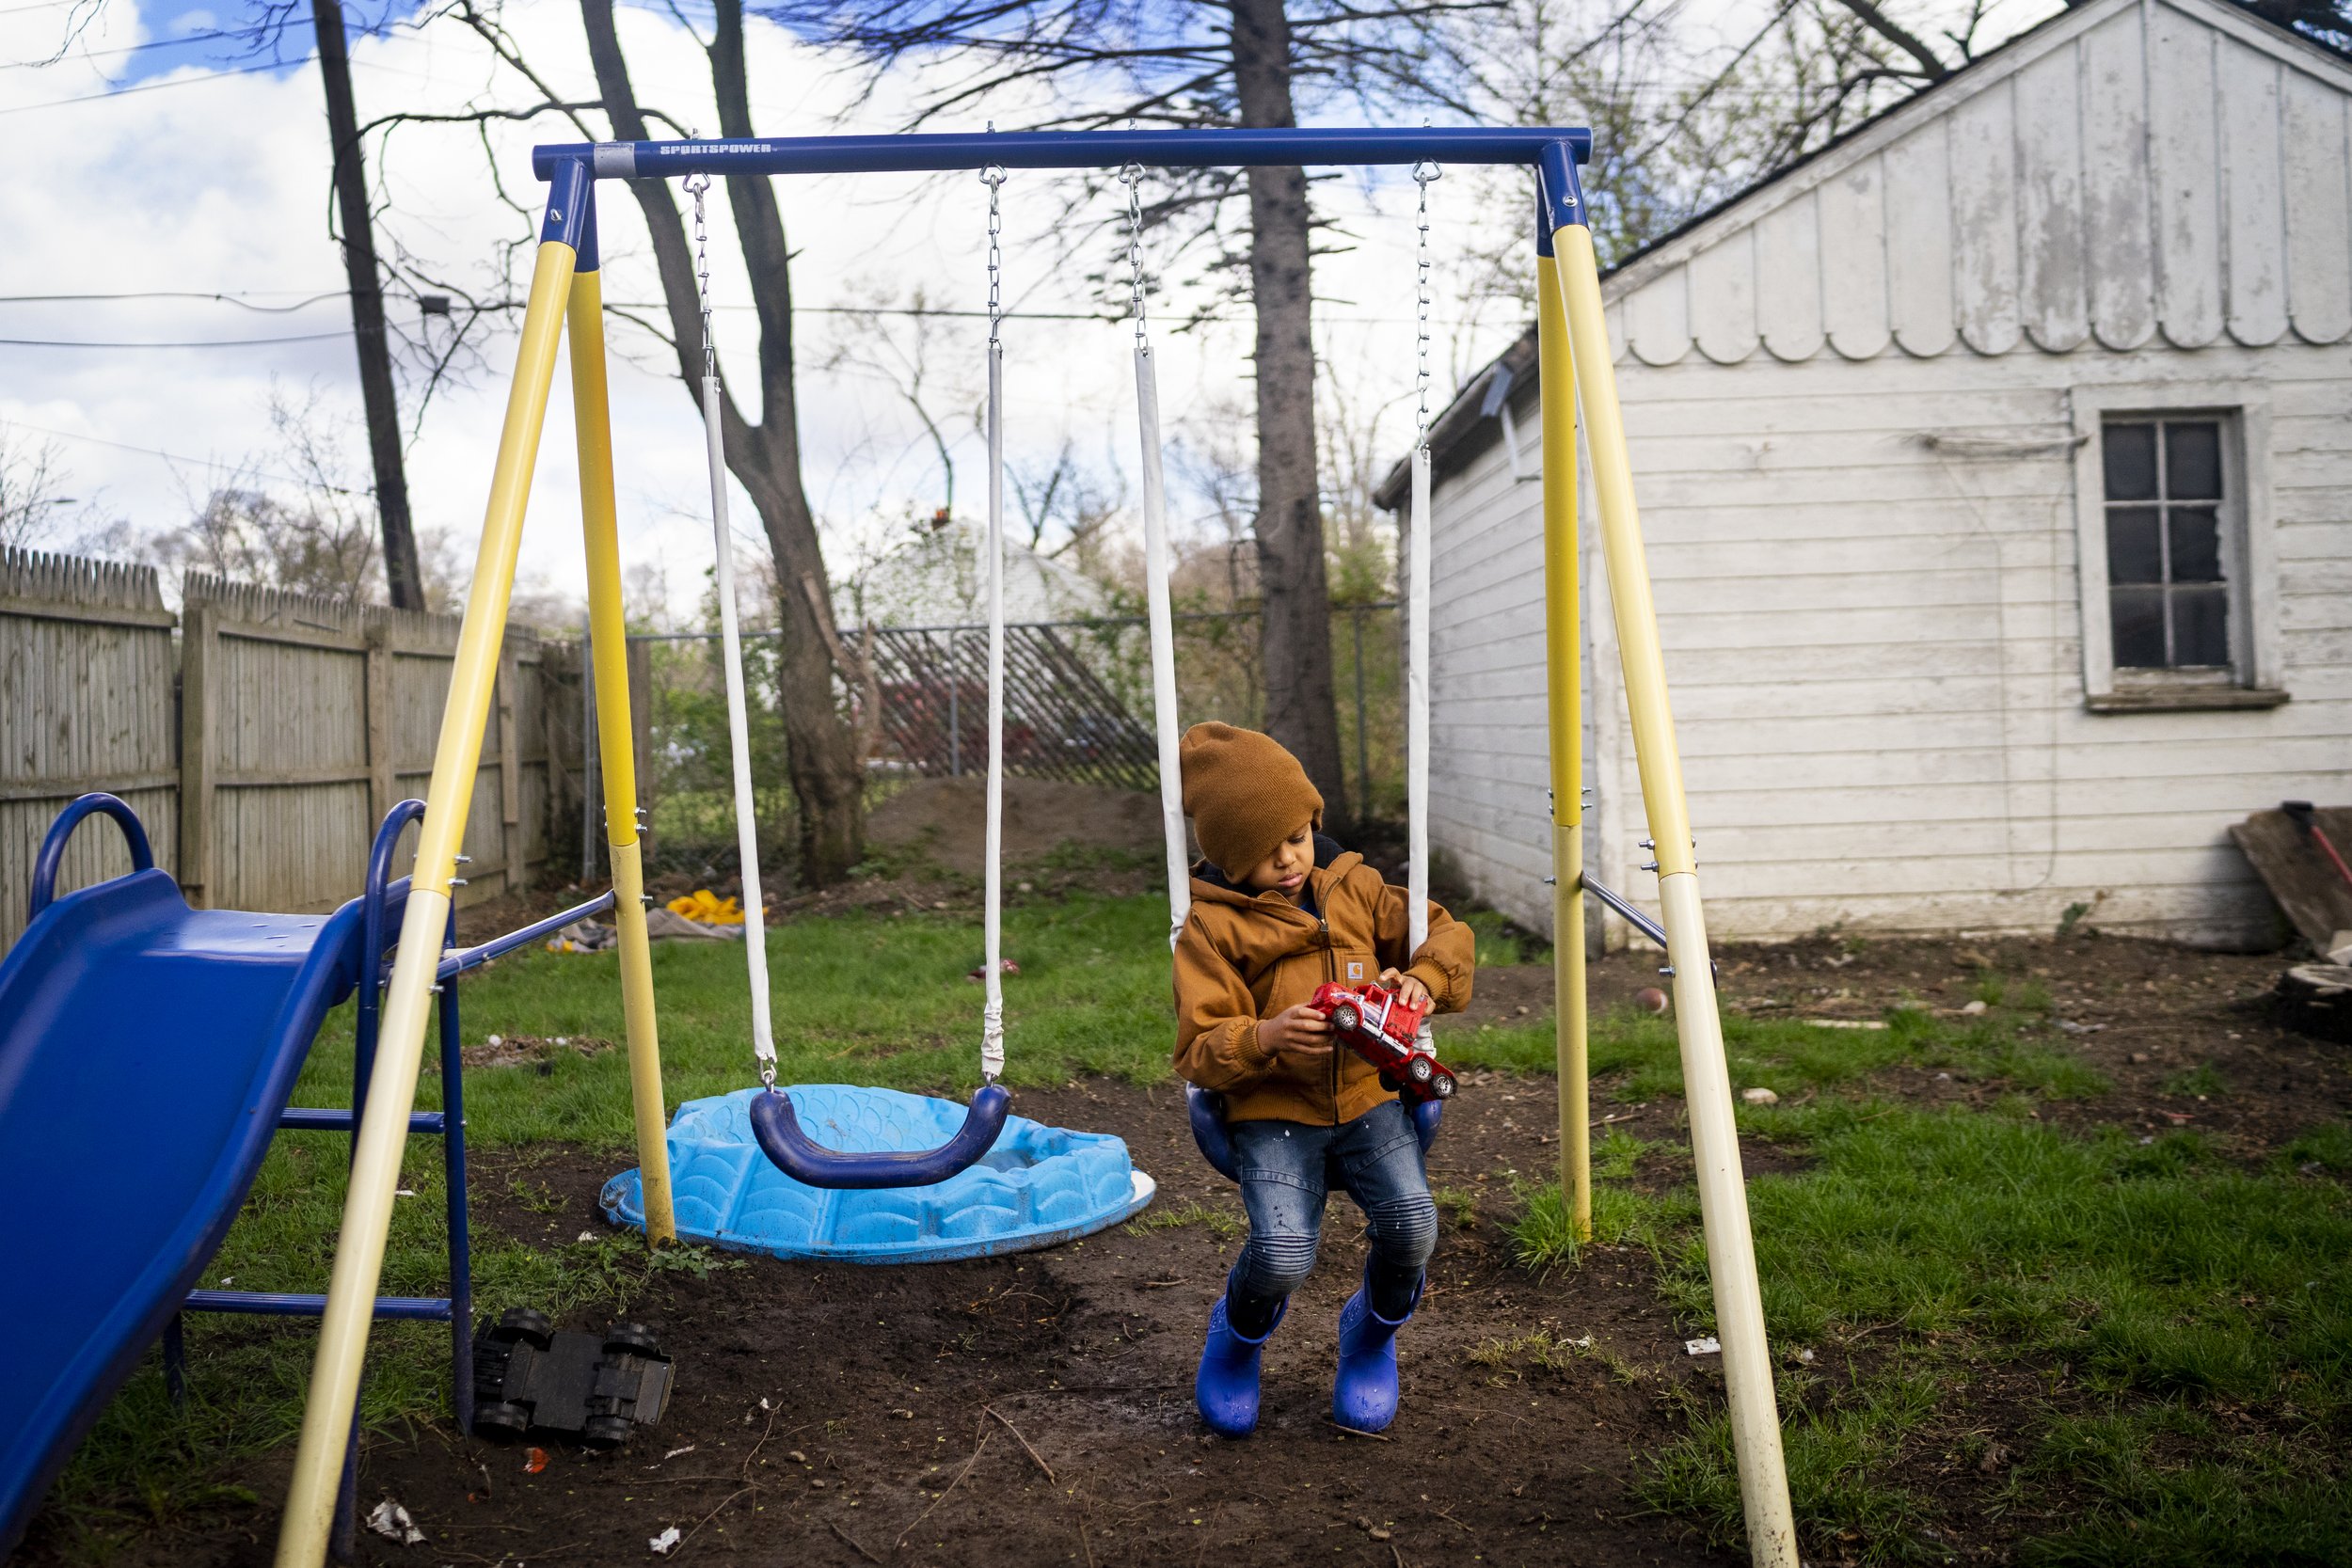  MyKail Moultrie, 4, plays with a toy truck on his backyard swing on Sunday, April 11, 2021, in Detroit. Since a young age, MyKail was non-verbal which led his parents to get him tested for autism. MyKail's mother,Tiera Lavin, now runs a business cal